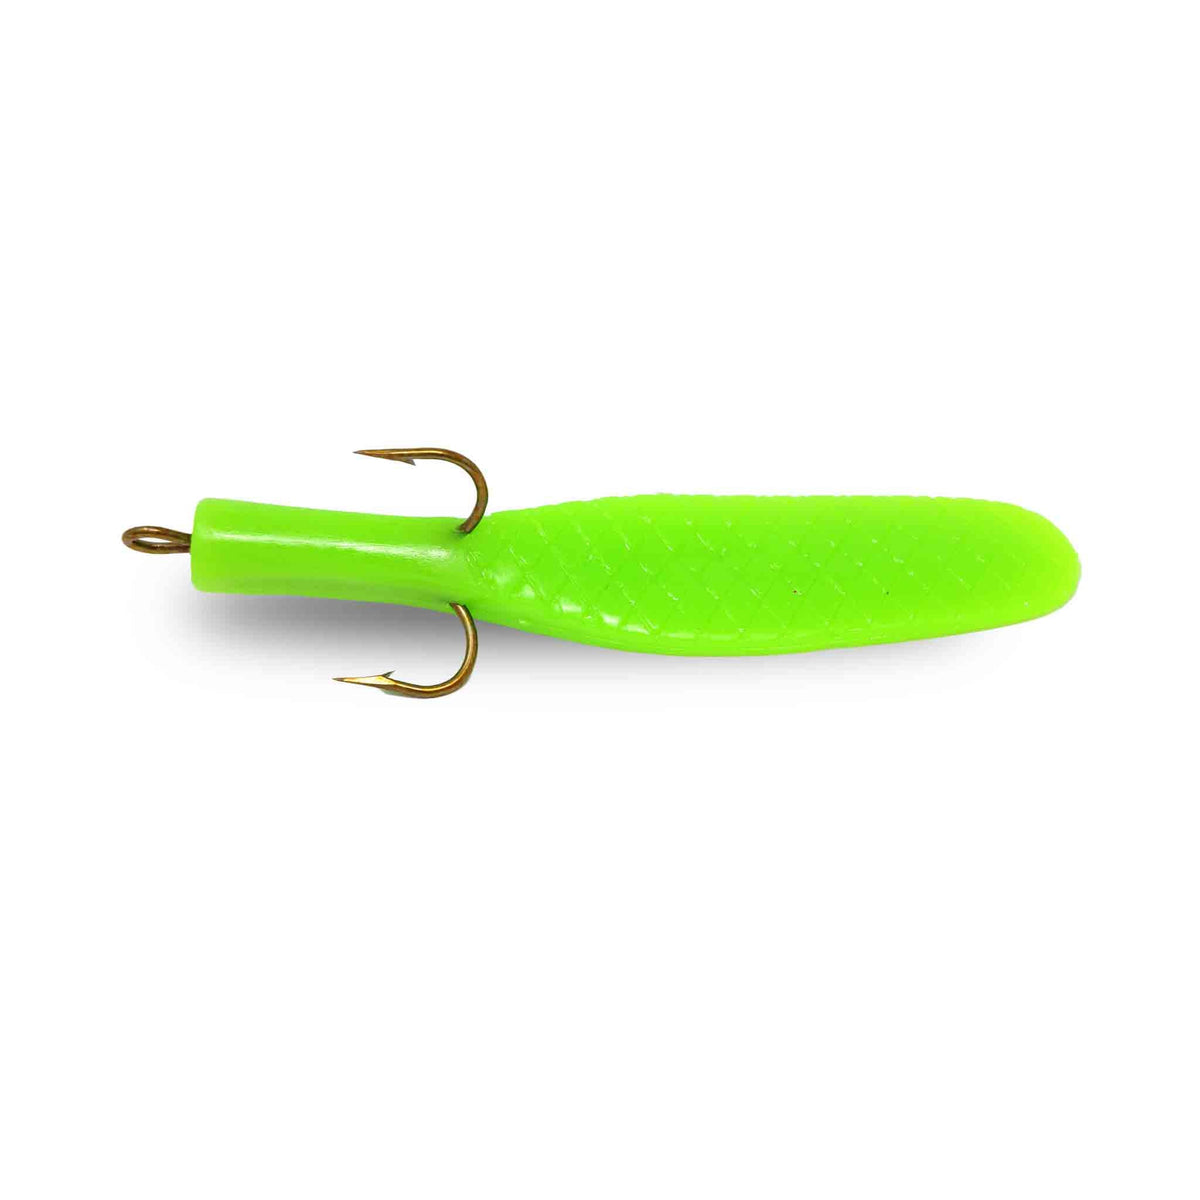 Beaver's Baits Baby Beaver XL Tail Lime Replacement Tails